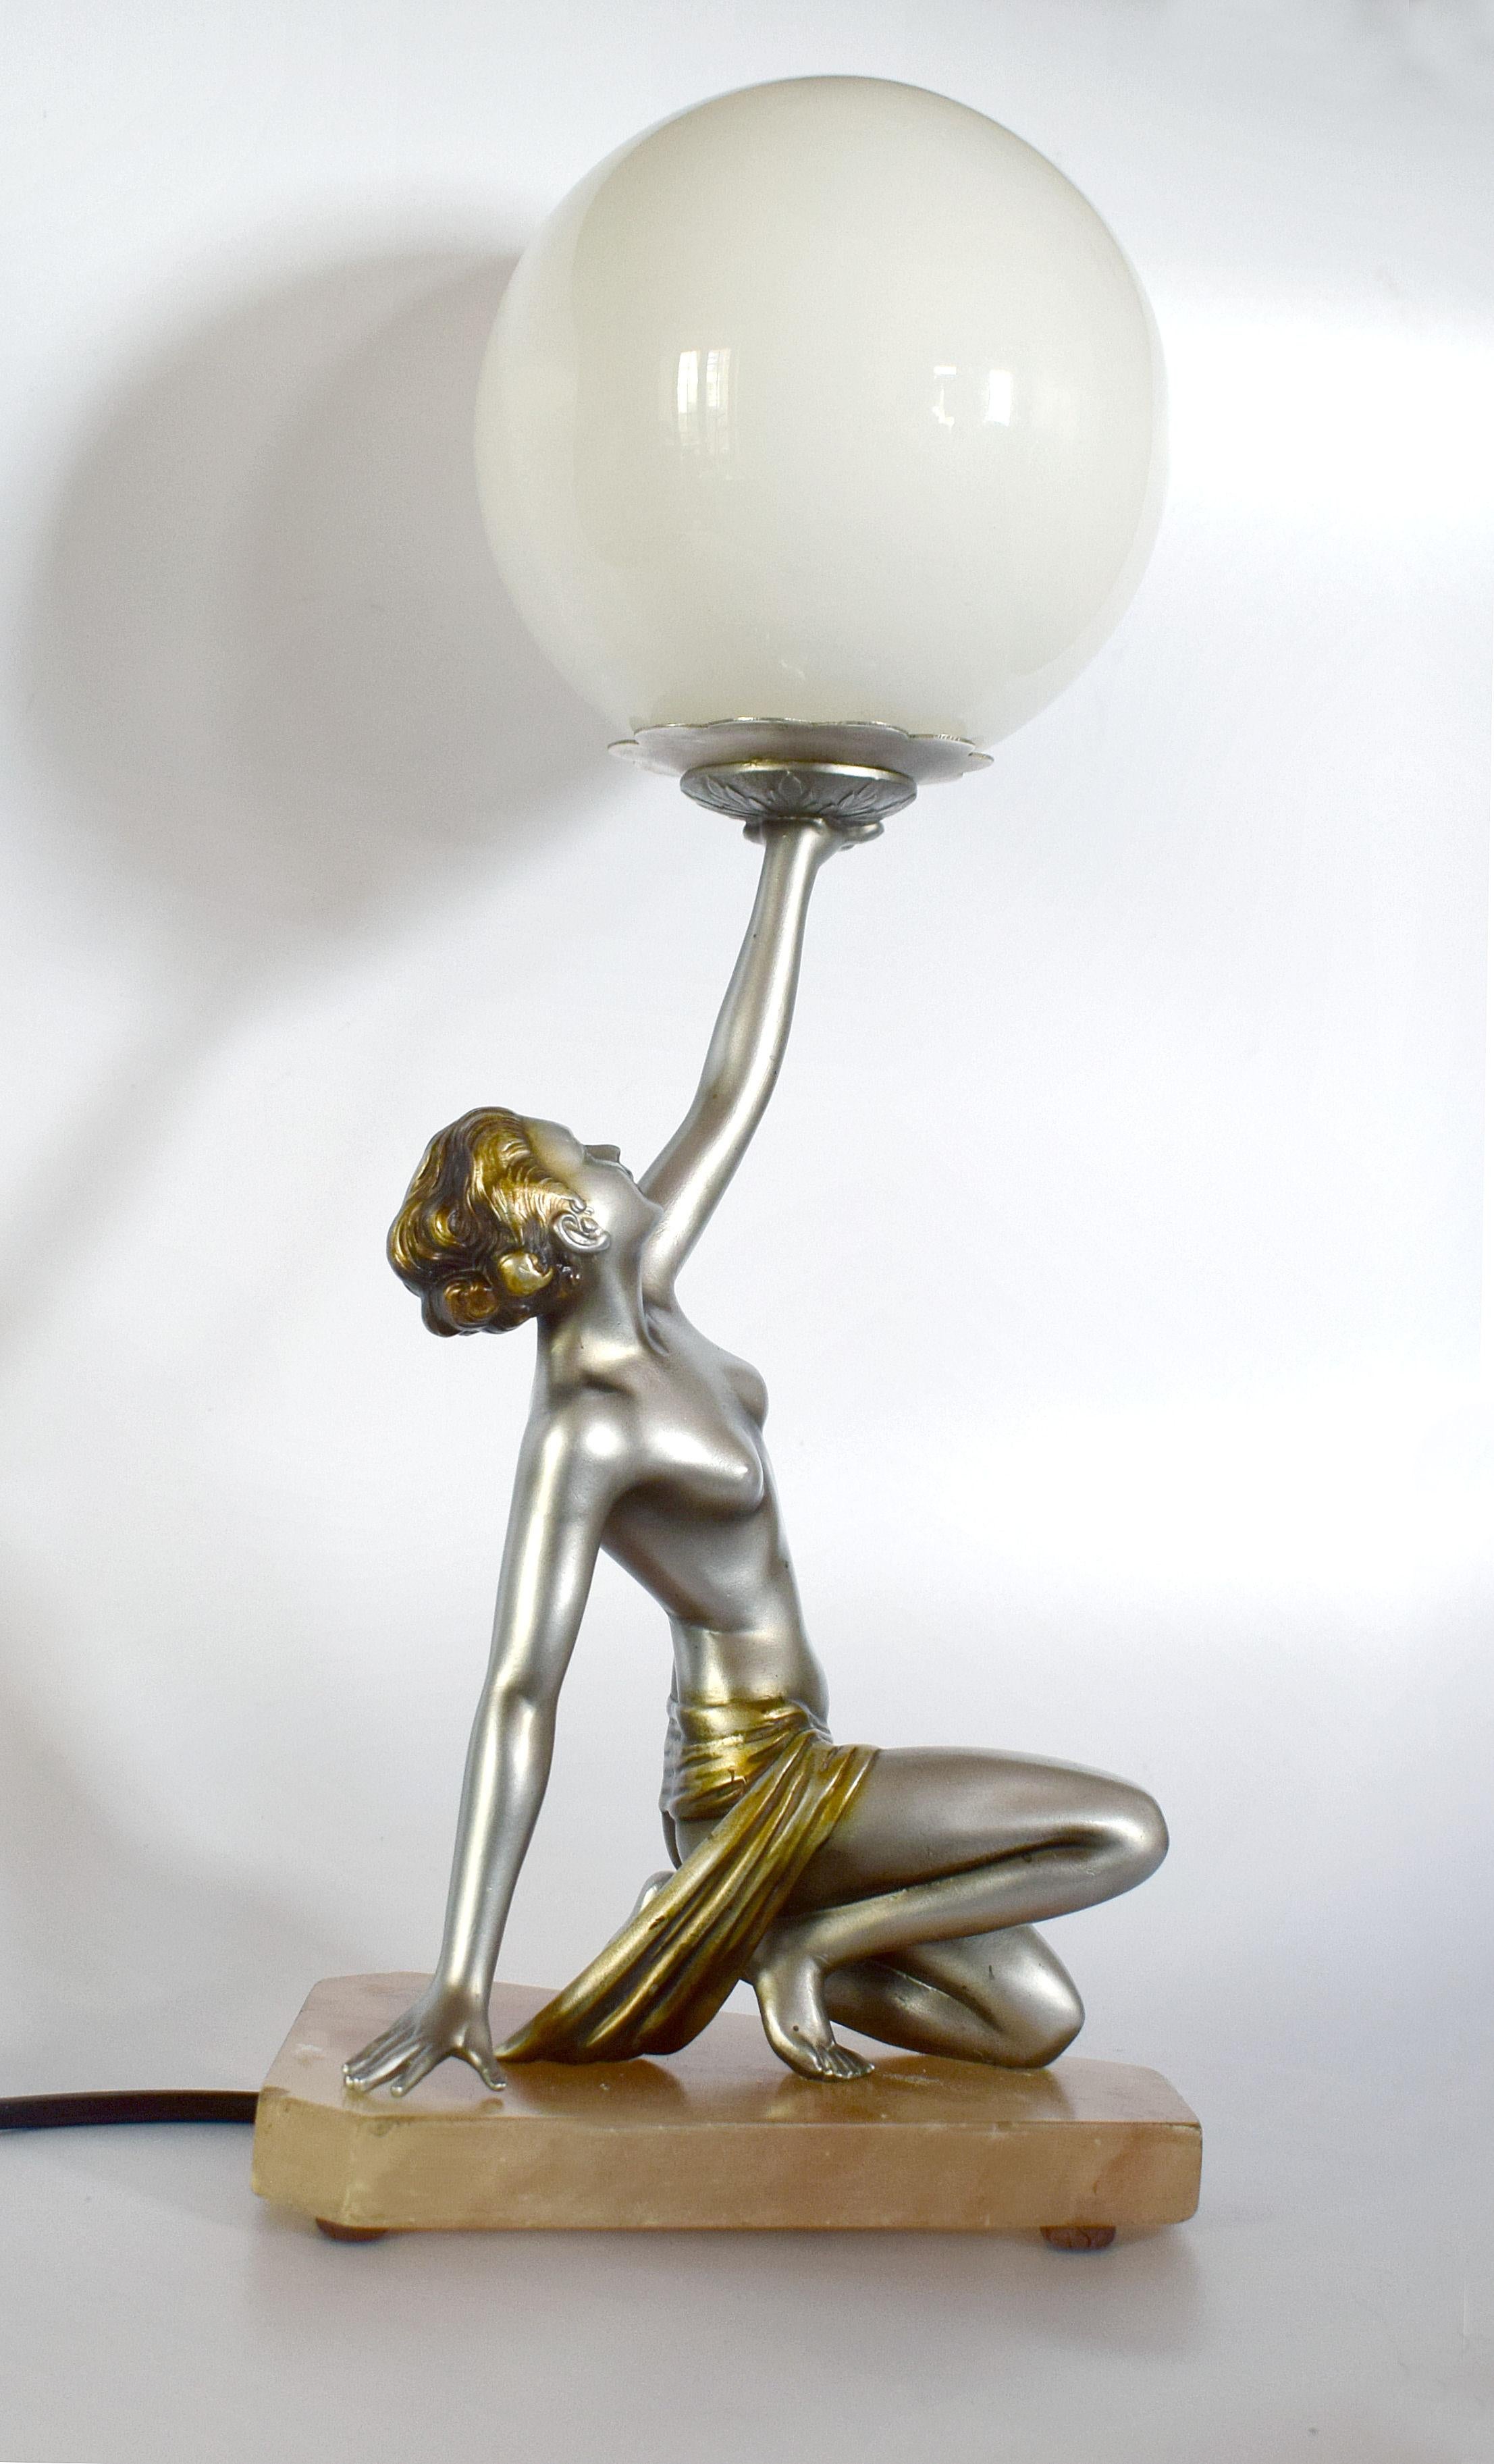 An impressive 40 cms tall this original 1930s Art Deco cold painted spelter table lamp is attributed to Lorenzl unsigned and features a semi nude lady holding aloft a milk white glass globe. Kneeling on an alabaster base she is in beautiful